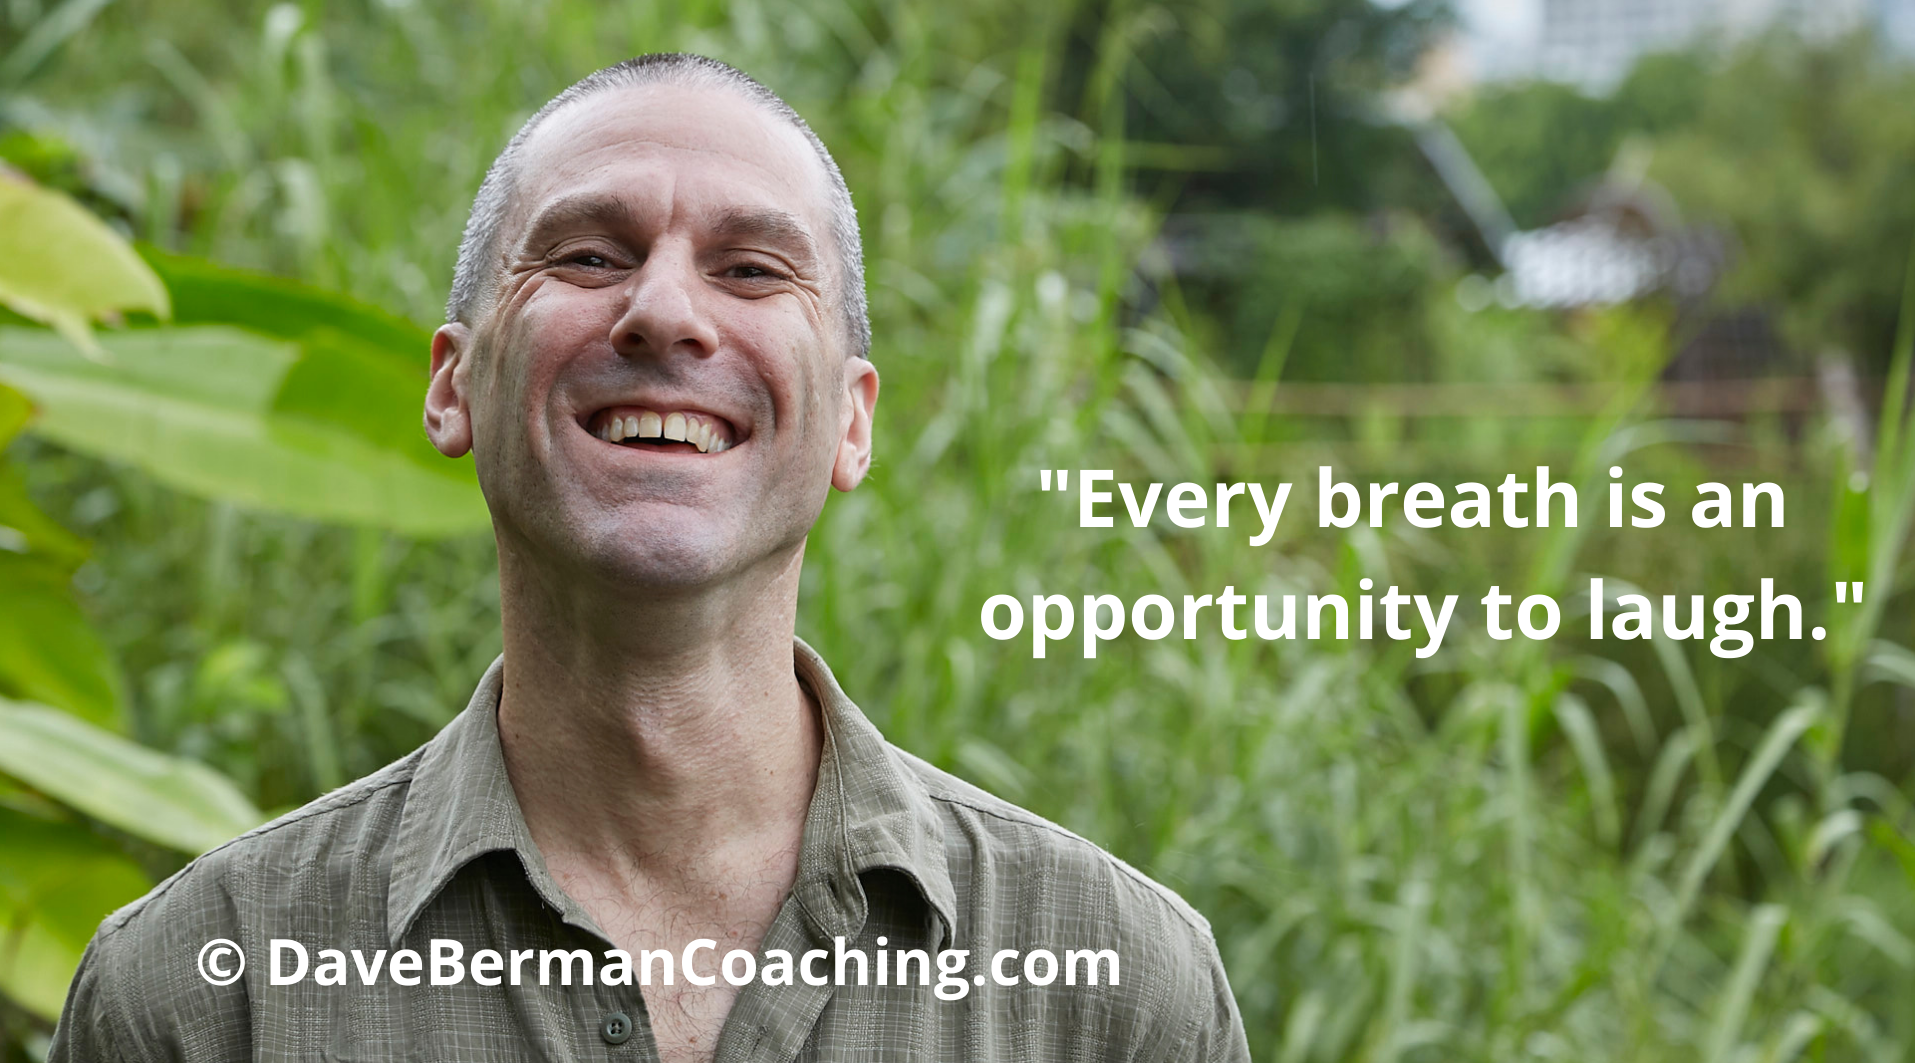 Dave Berman is surrounded by nature, beside the caption: "Every breath is an opportunity to laugh." - DaveBermanCoaching.com